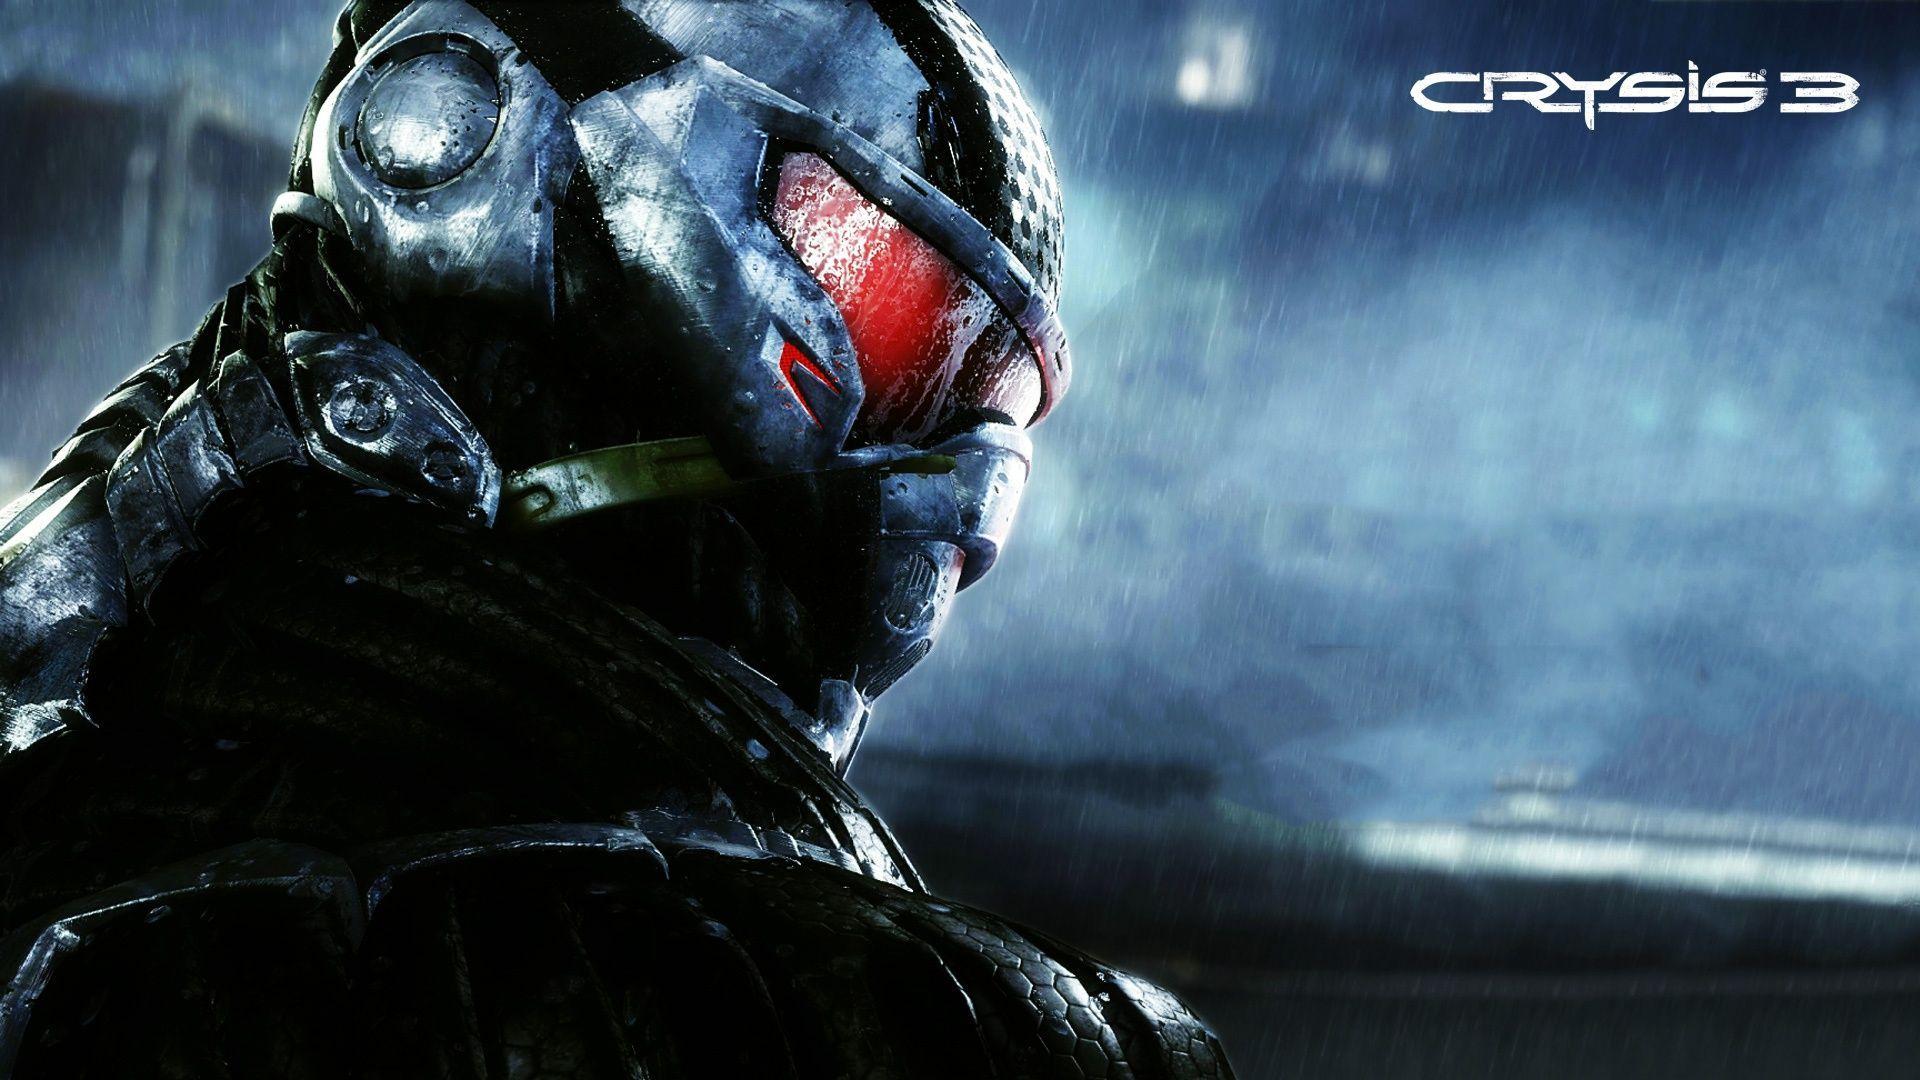 Crysis 3 The Nanosuit 1080p HD Wallpaper Games. Things to Wear